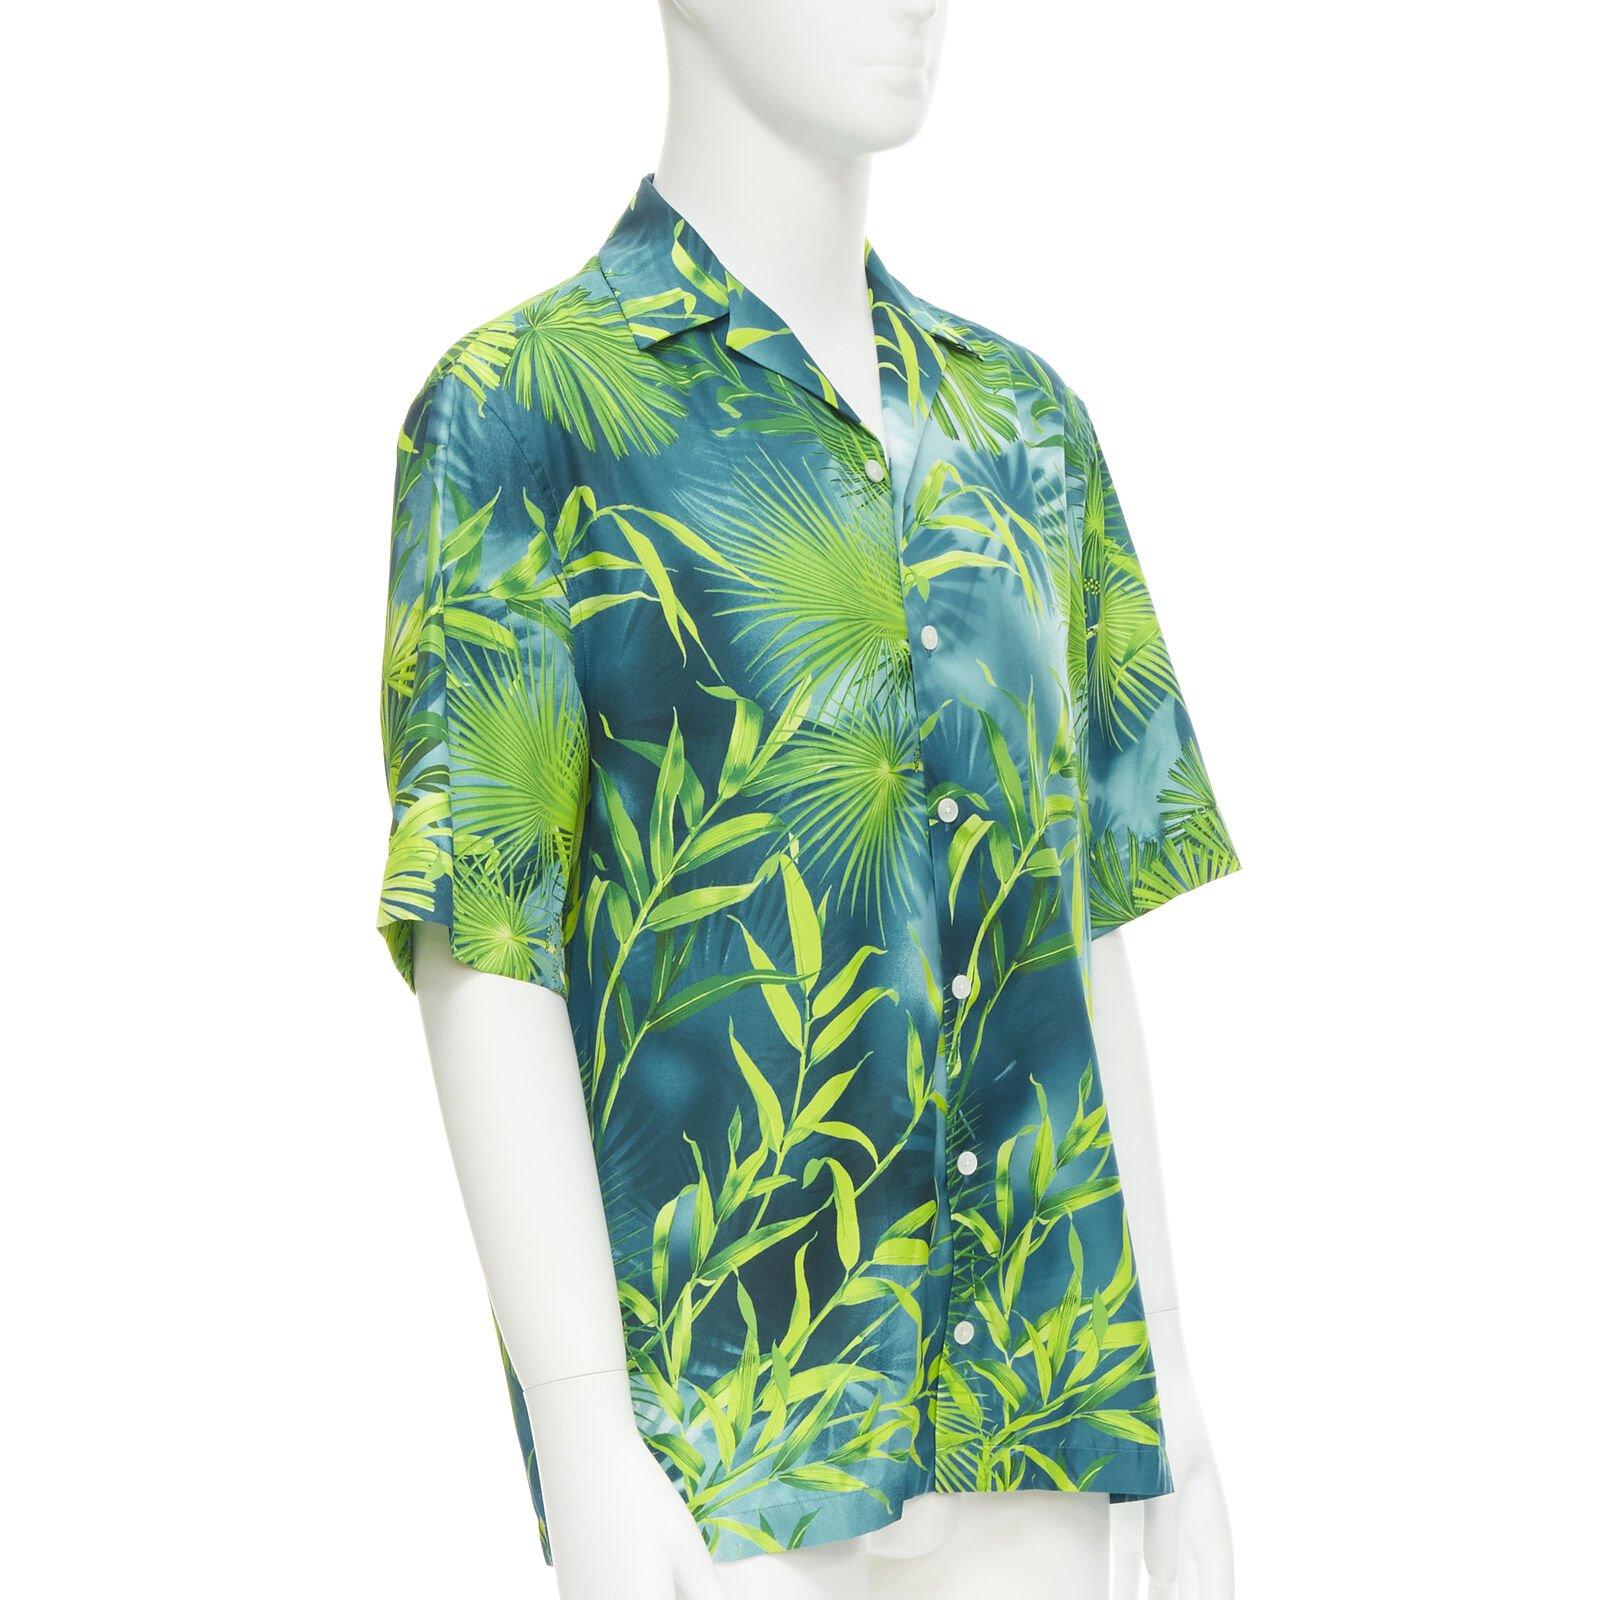 VERSACE 2020 Iconic JLo Jungle print green tropical print shirt EU38 S In New Condition For Sale In Hong Kong, NT